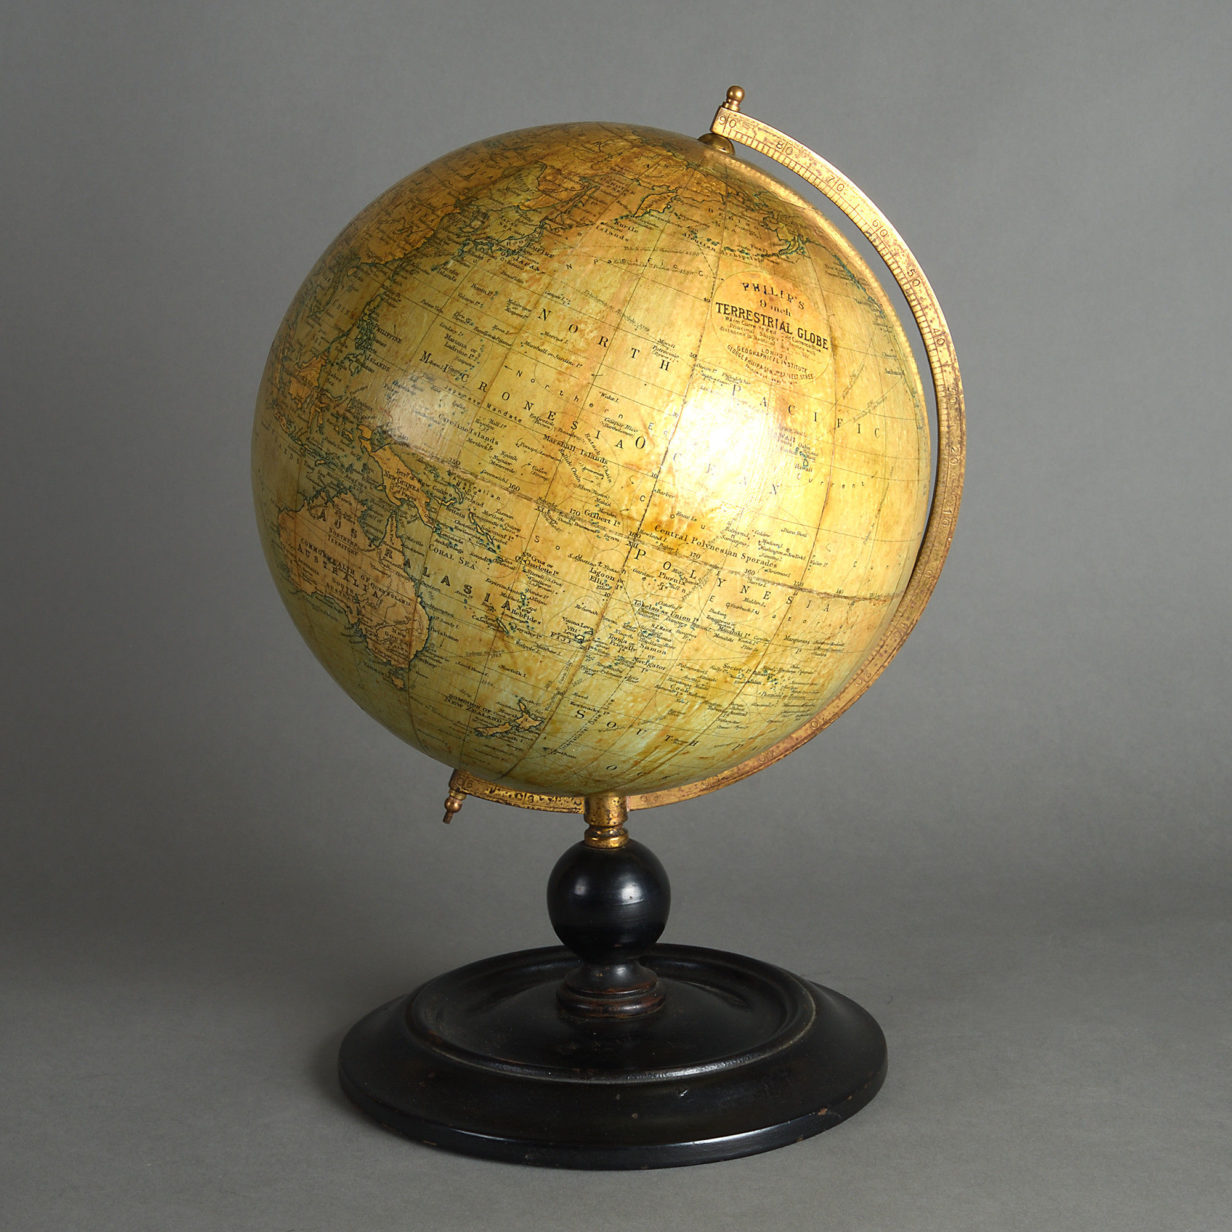 Early 20th century 9 inch terrestrial globe by philip's of london